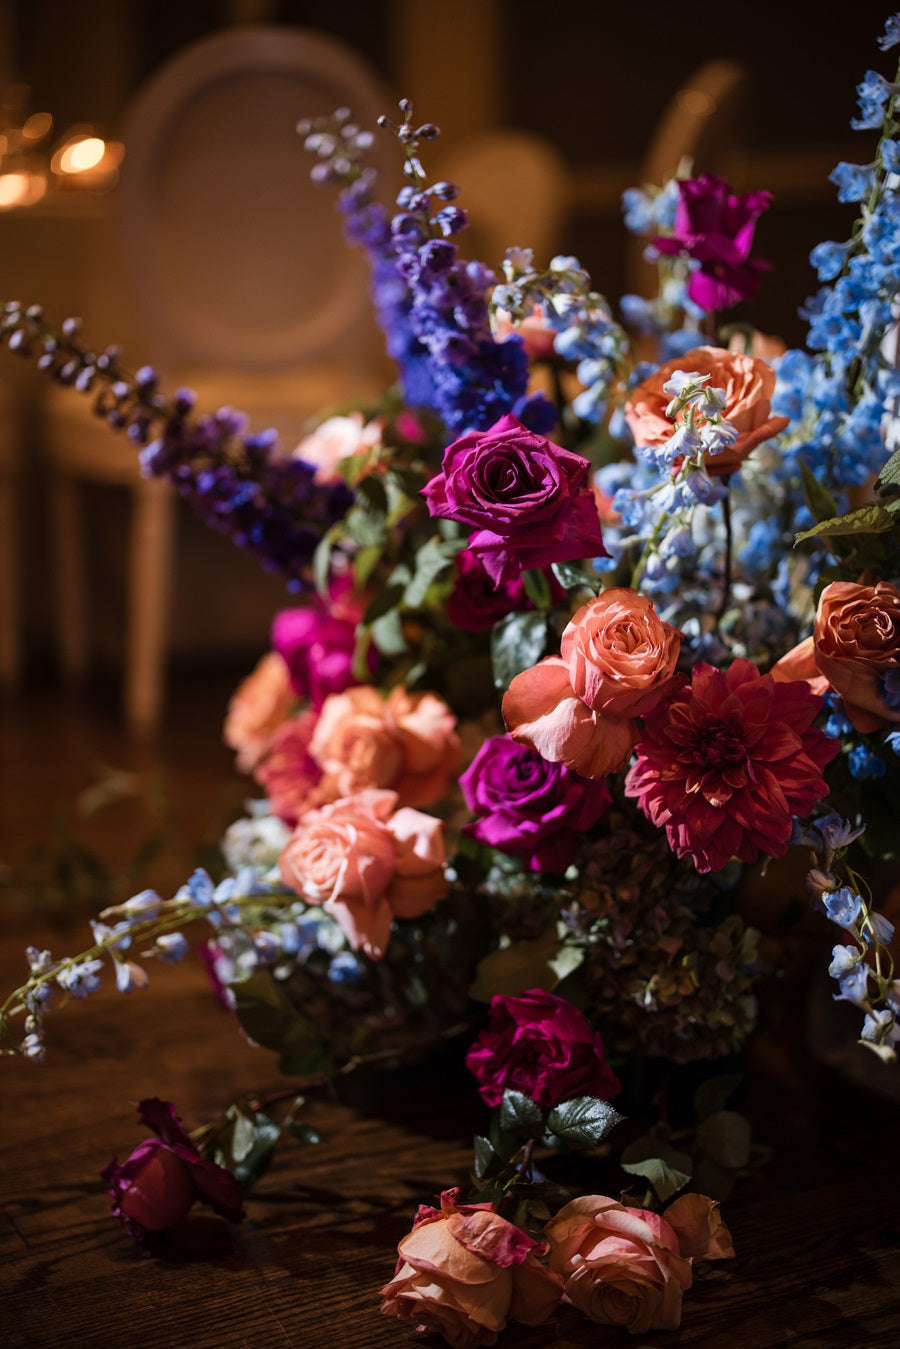 Close up on a floor floral arrangement. The colors are blue, peach, pink, purple, and green. Flowers pictured are roses, hydrangea, orchids, delphinium, and assoreted greenery.